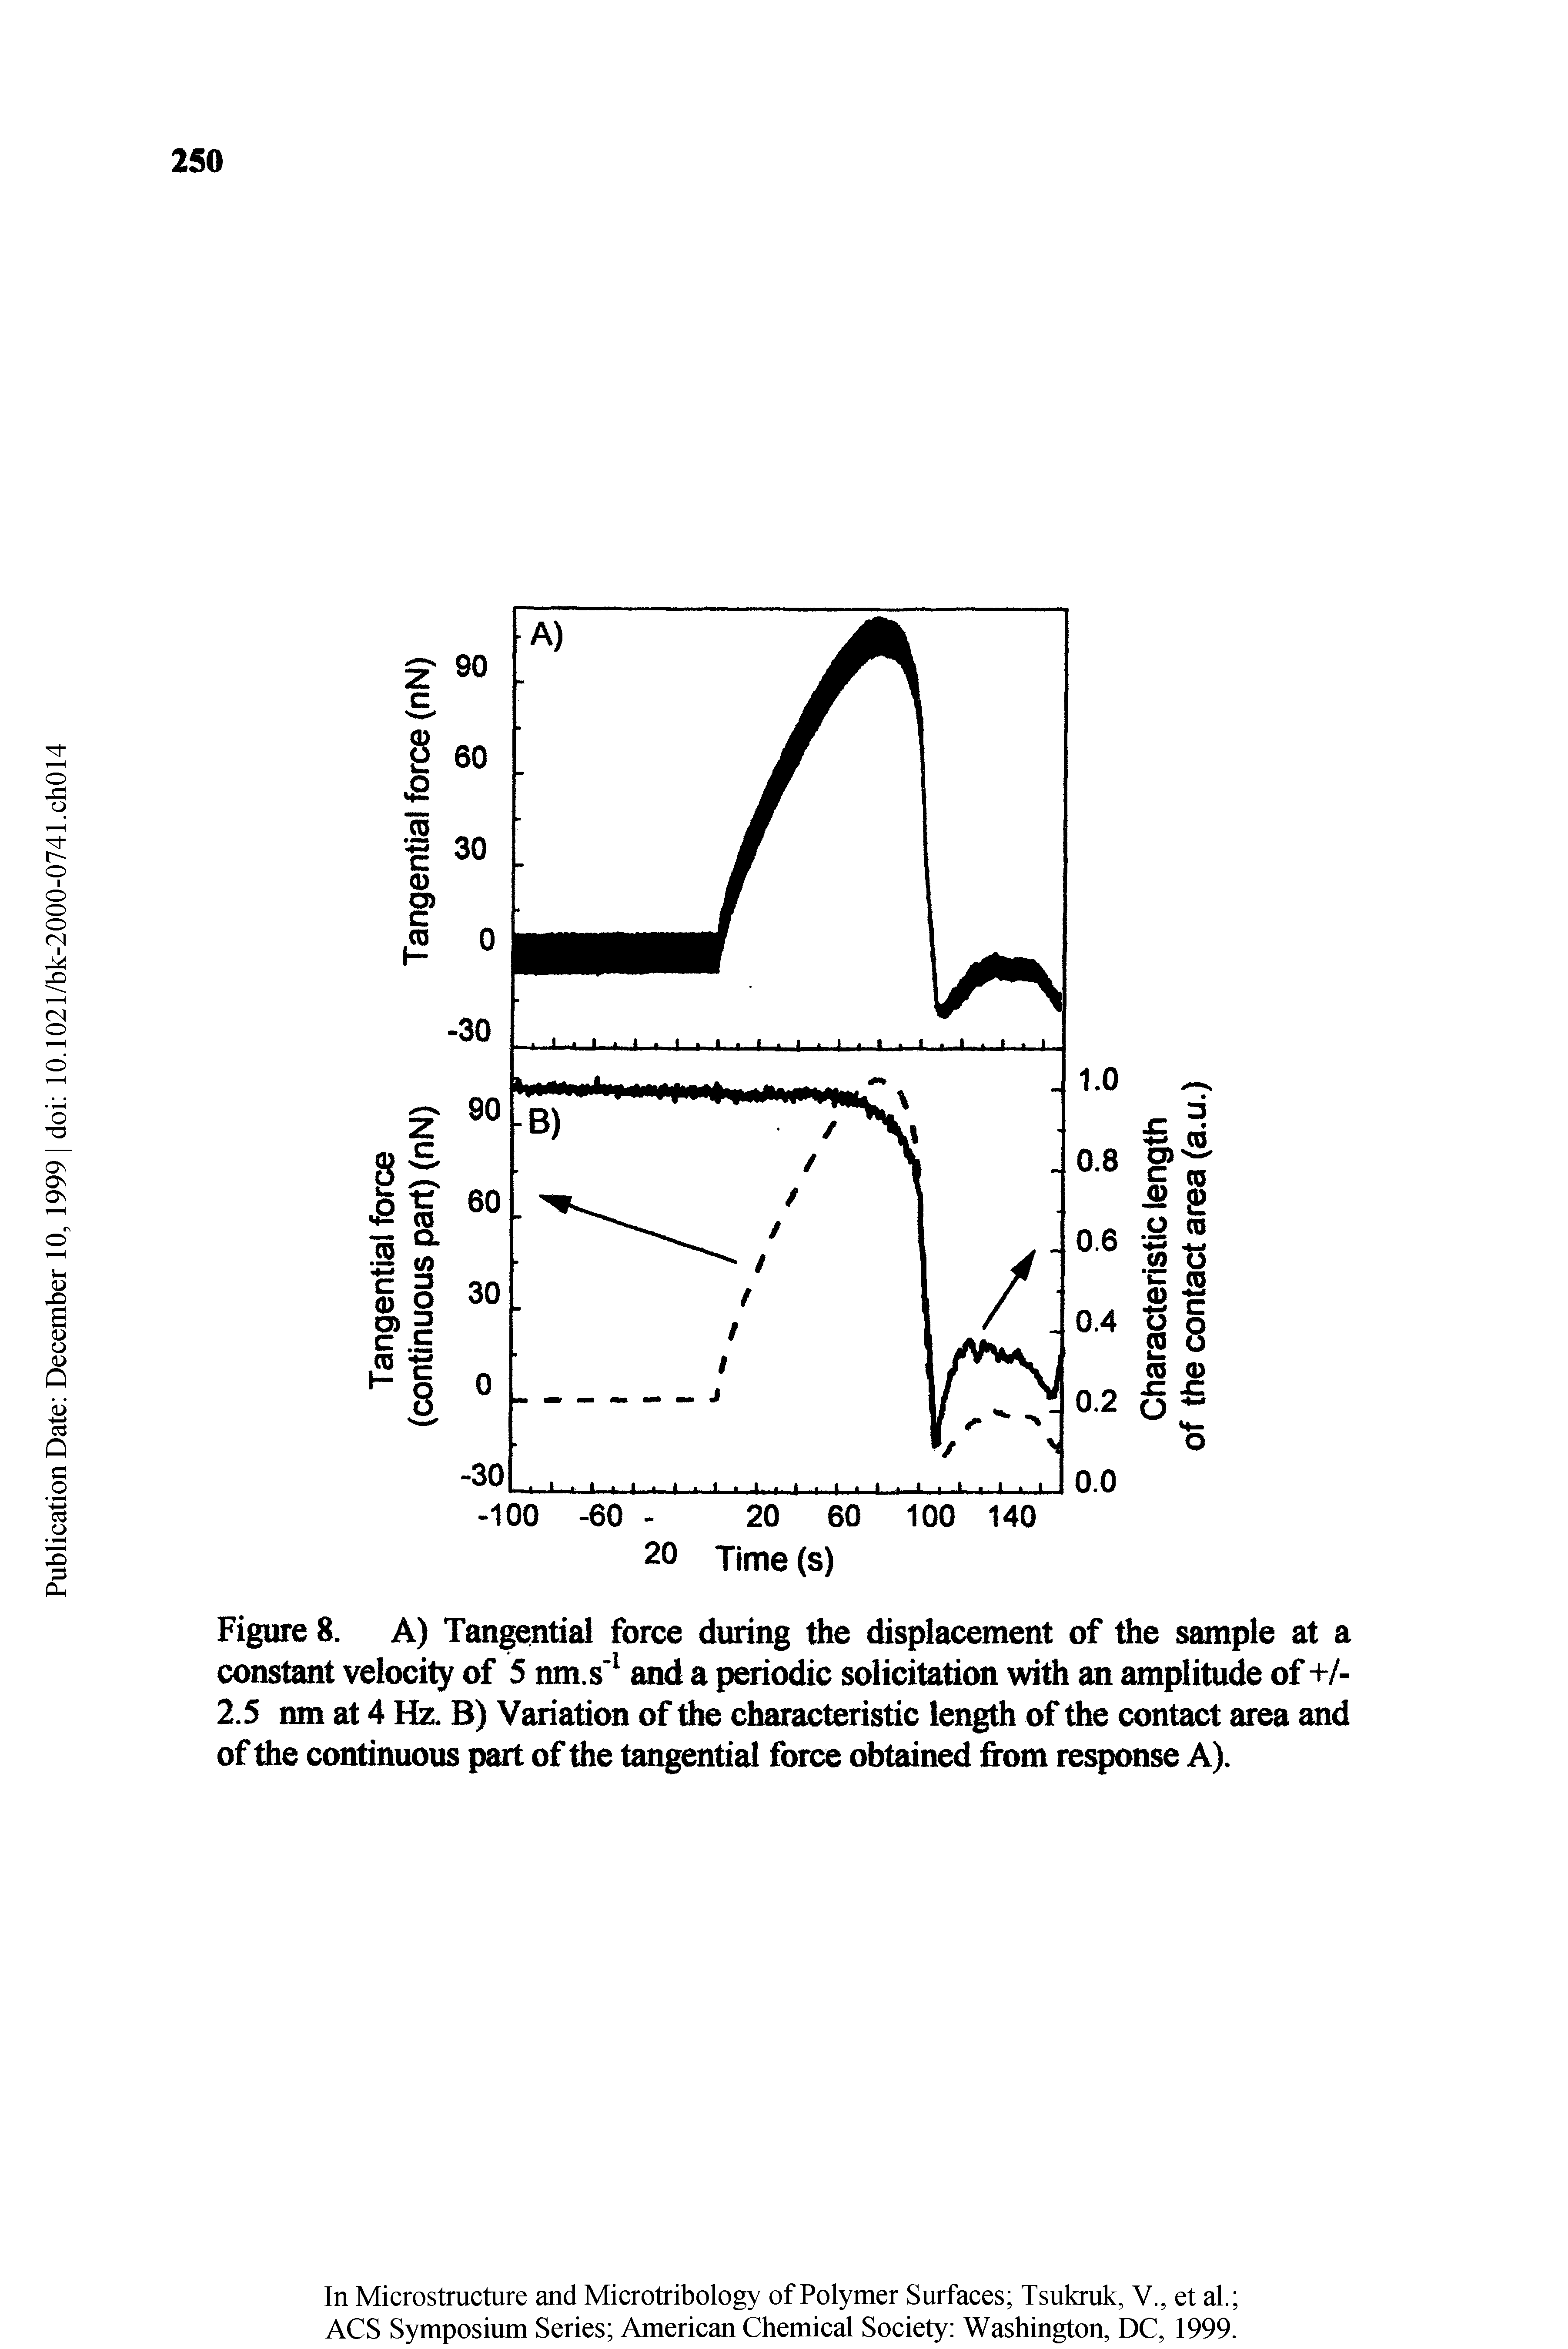 Figure 8. A) Tangential force during the displacement of the sample at a constant velocity of 5 nm.s and a periodic solicitation with an amplitude of+/-2.5 nm at 4 Hz. B) Variation of the characteristic length of the contact area and of the continuous part of the tangential force obtained from response A).